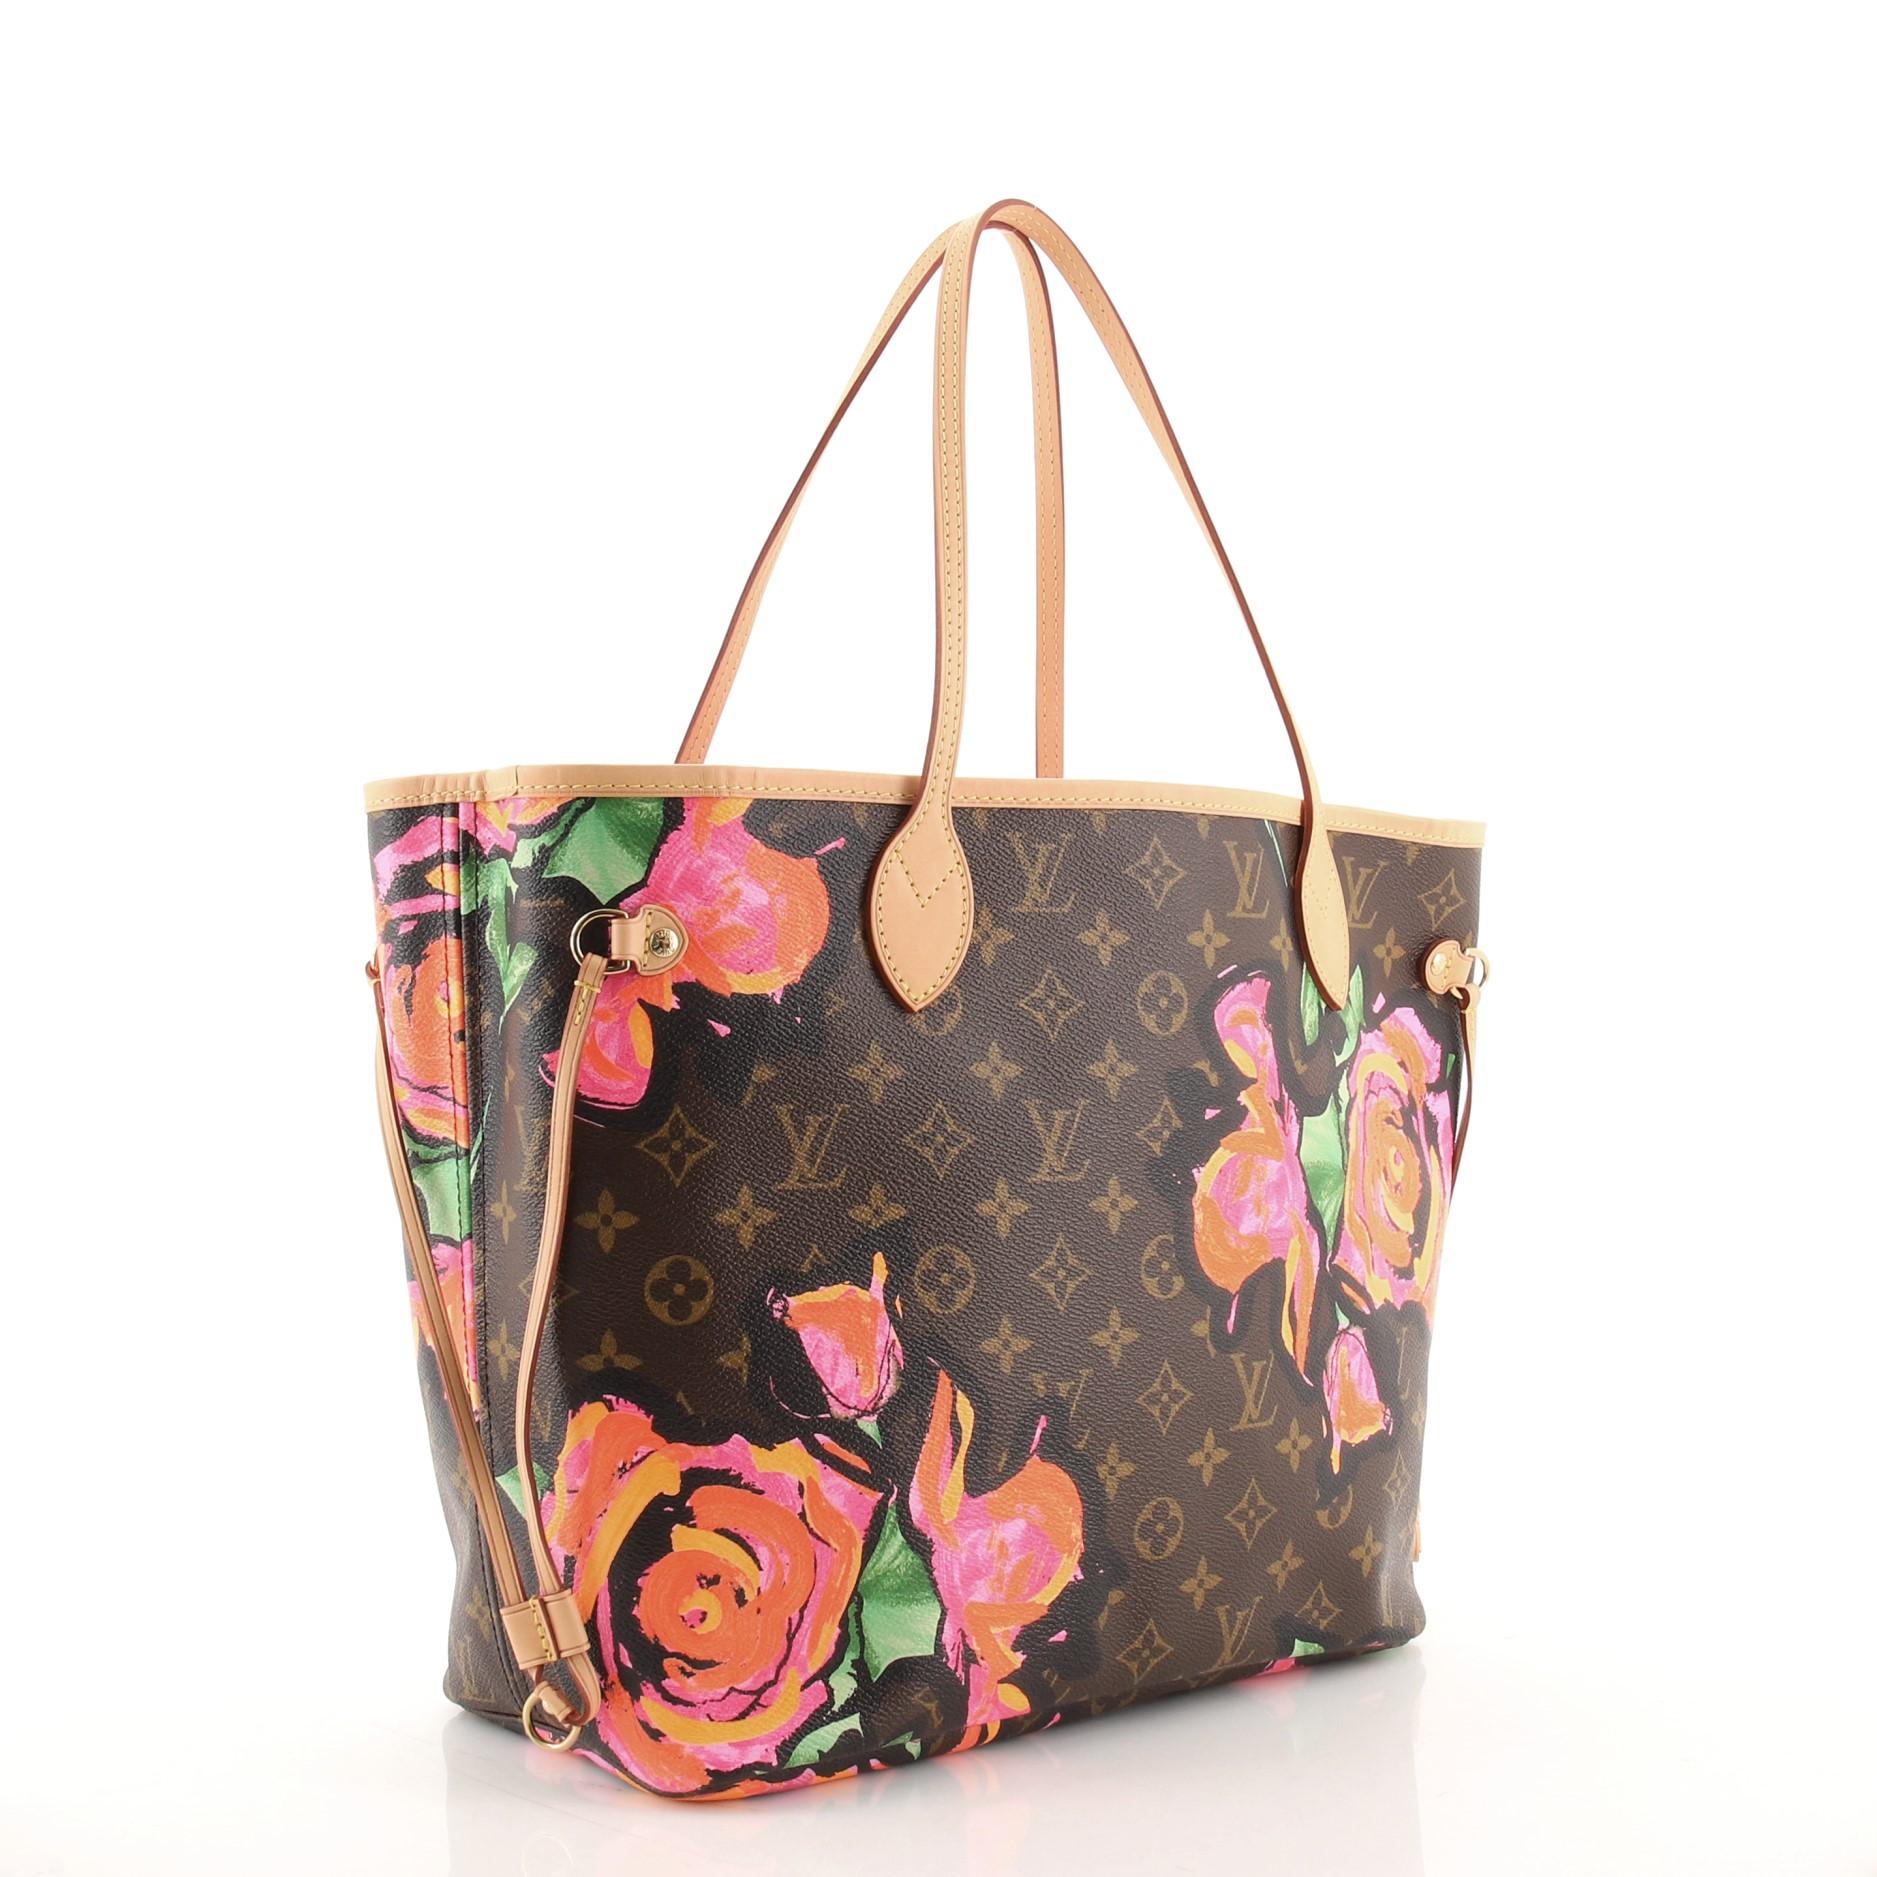 Black Louis Vuitton Neverfull Tote Limited Edition Monogram Roses MM